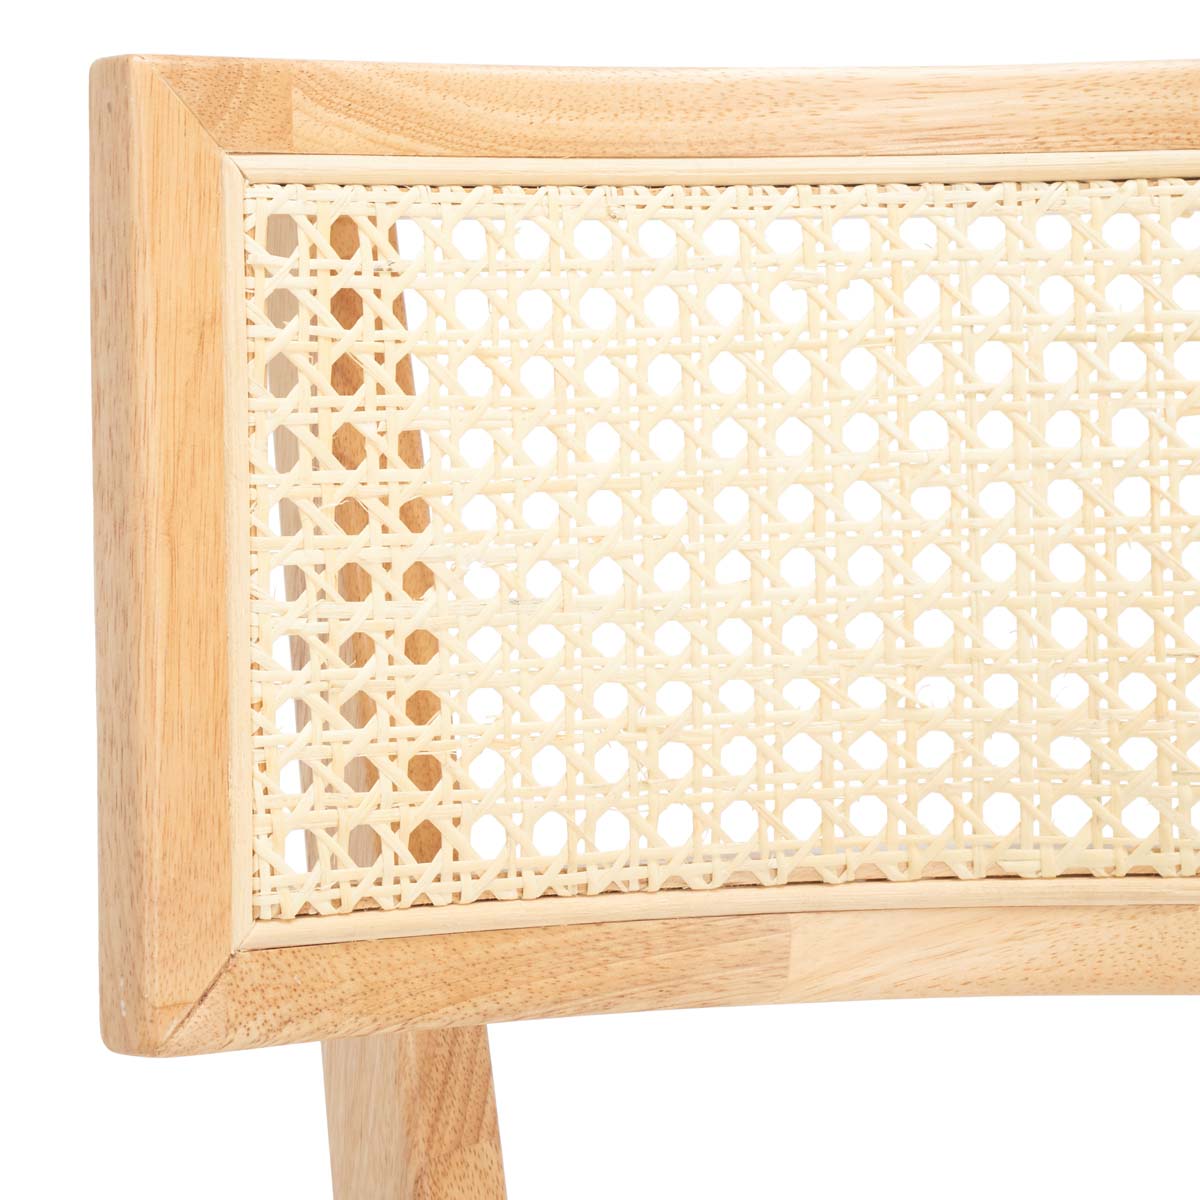 Safavieh Galway Cane Dining Chair , DCH1007